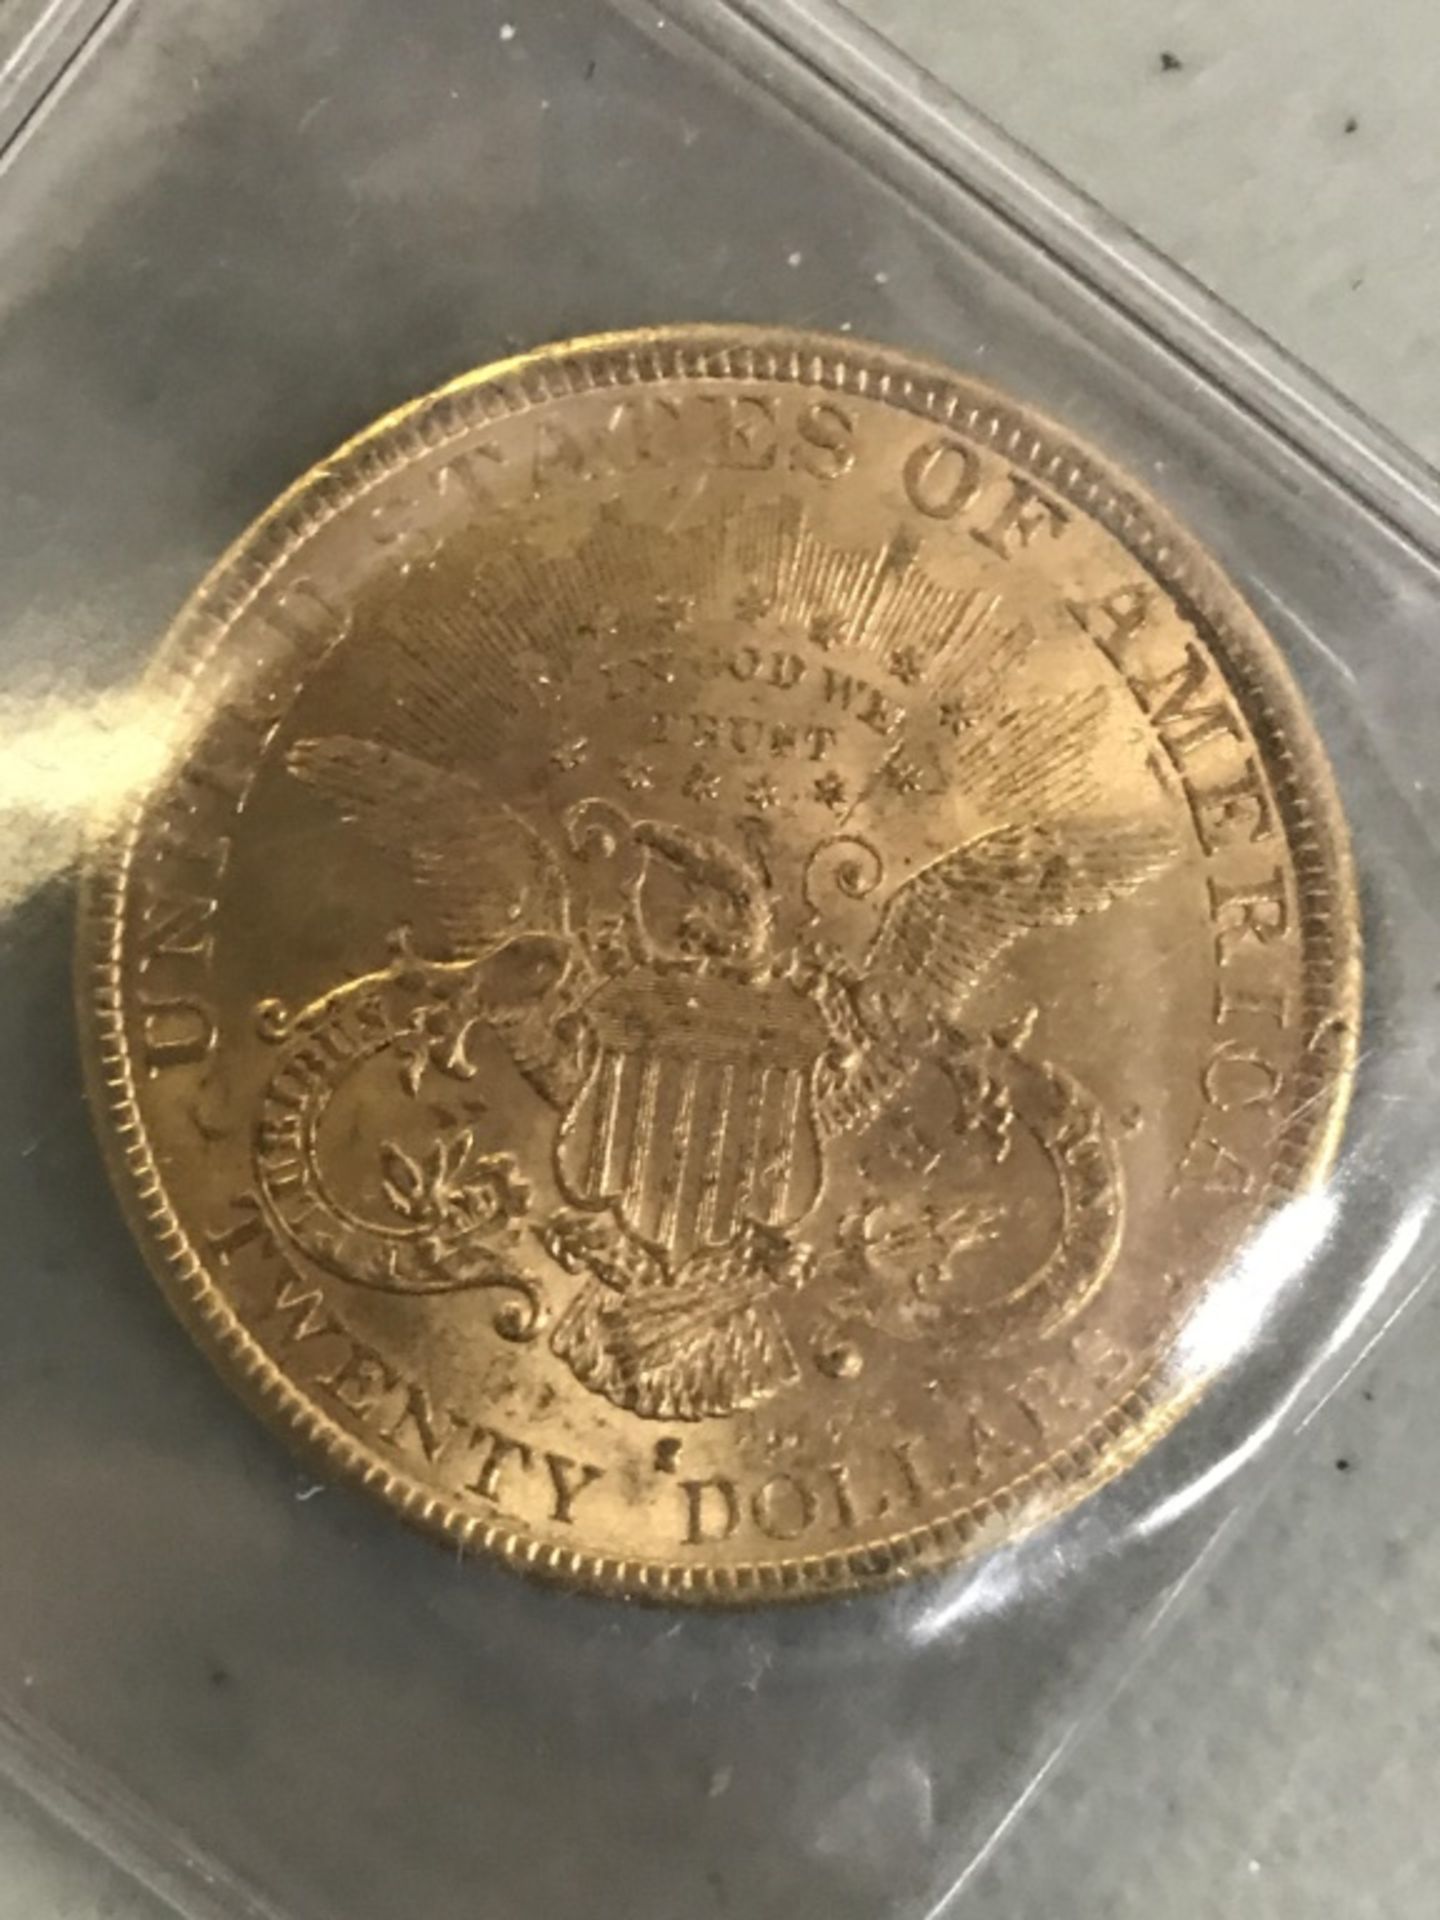 $20 Us Gold 1892 Coin - Image 6 of 9